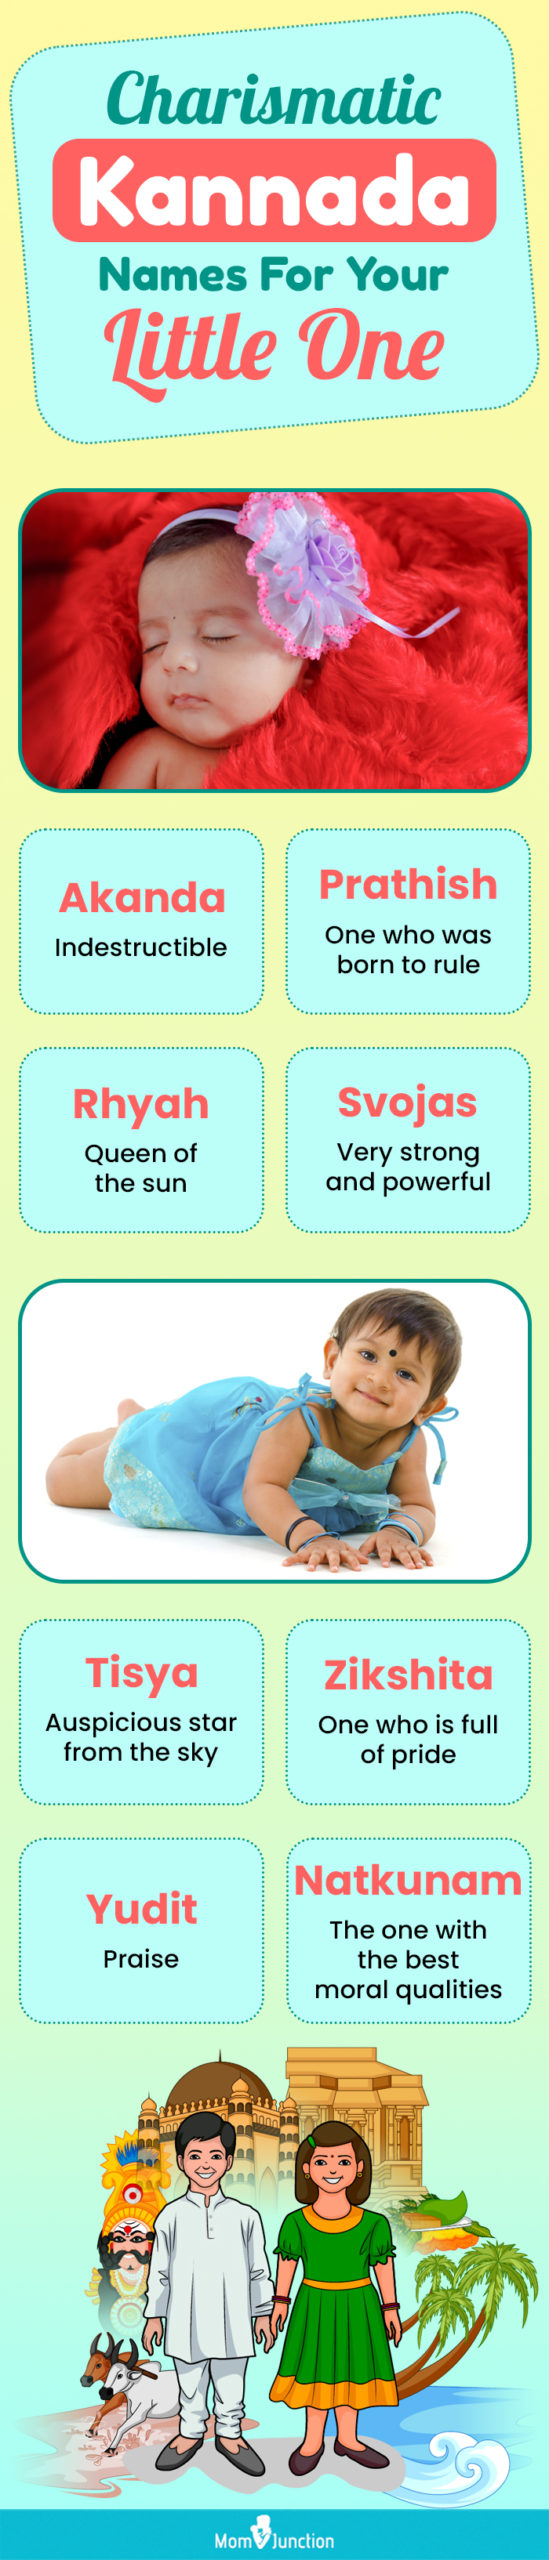 charismatic kannada names for your little one (infographic)